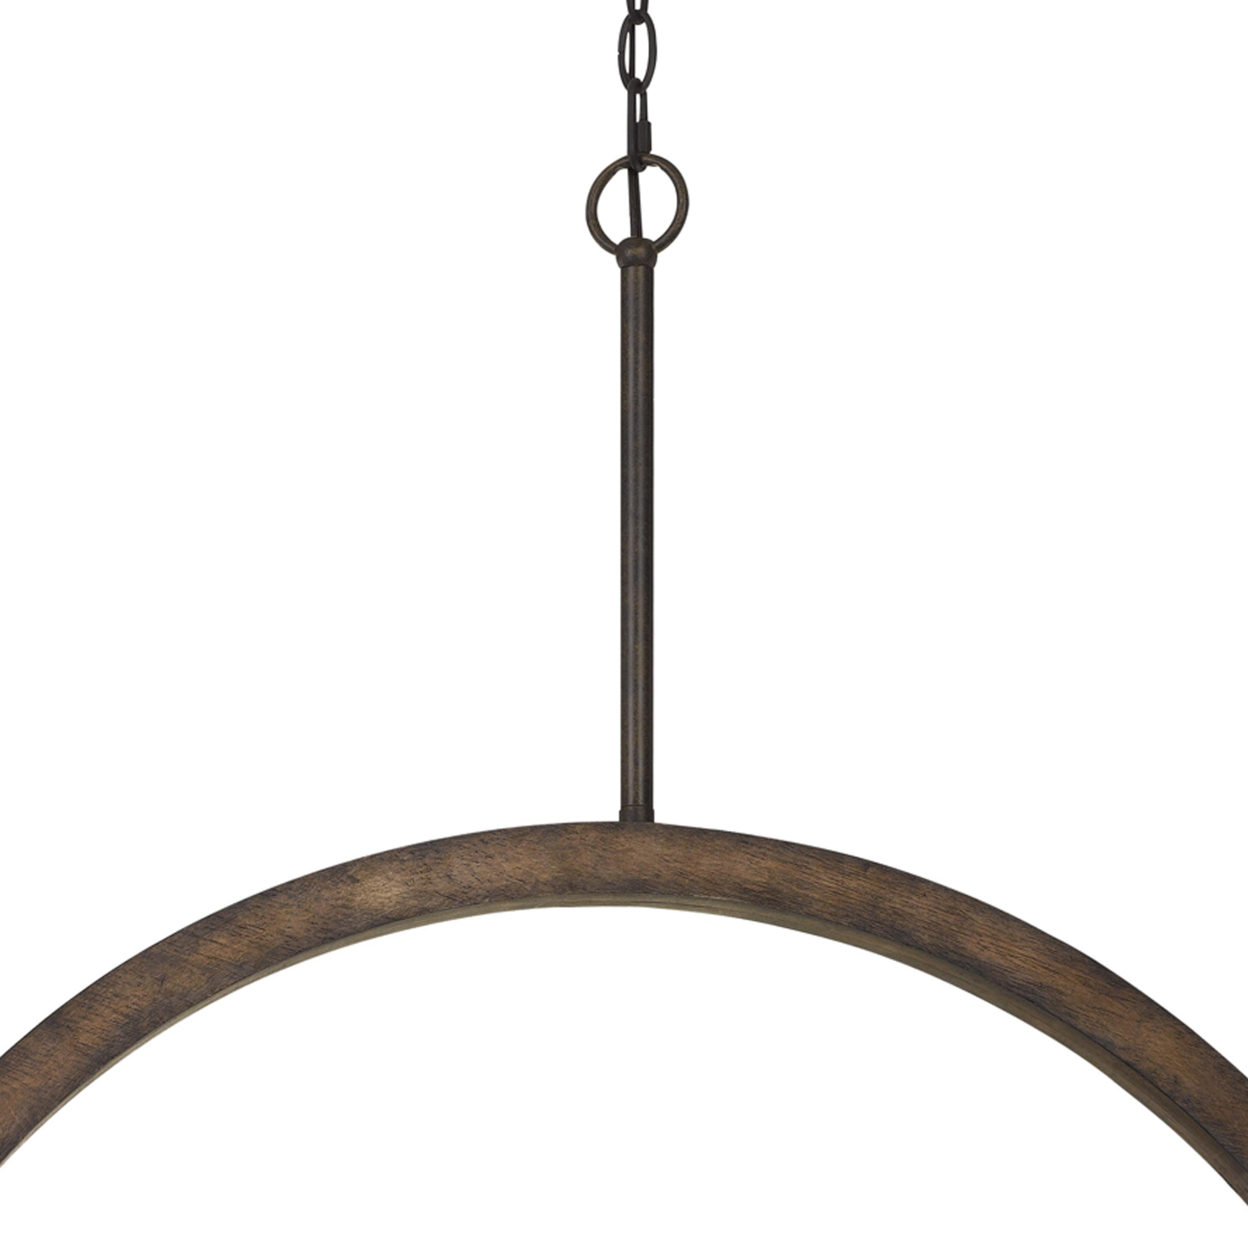 8 Bulb Chandelier With Arched Wooden And Metal Frame, Brown And Bronze- Saltoro Sherpi